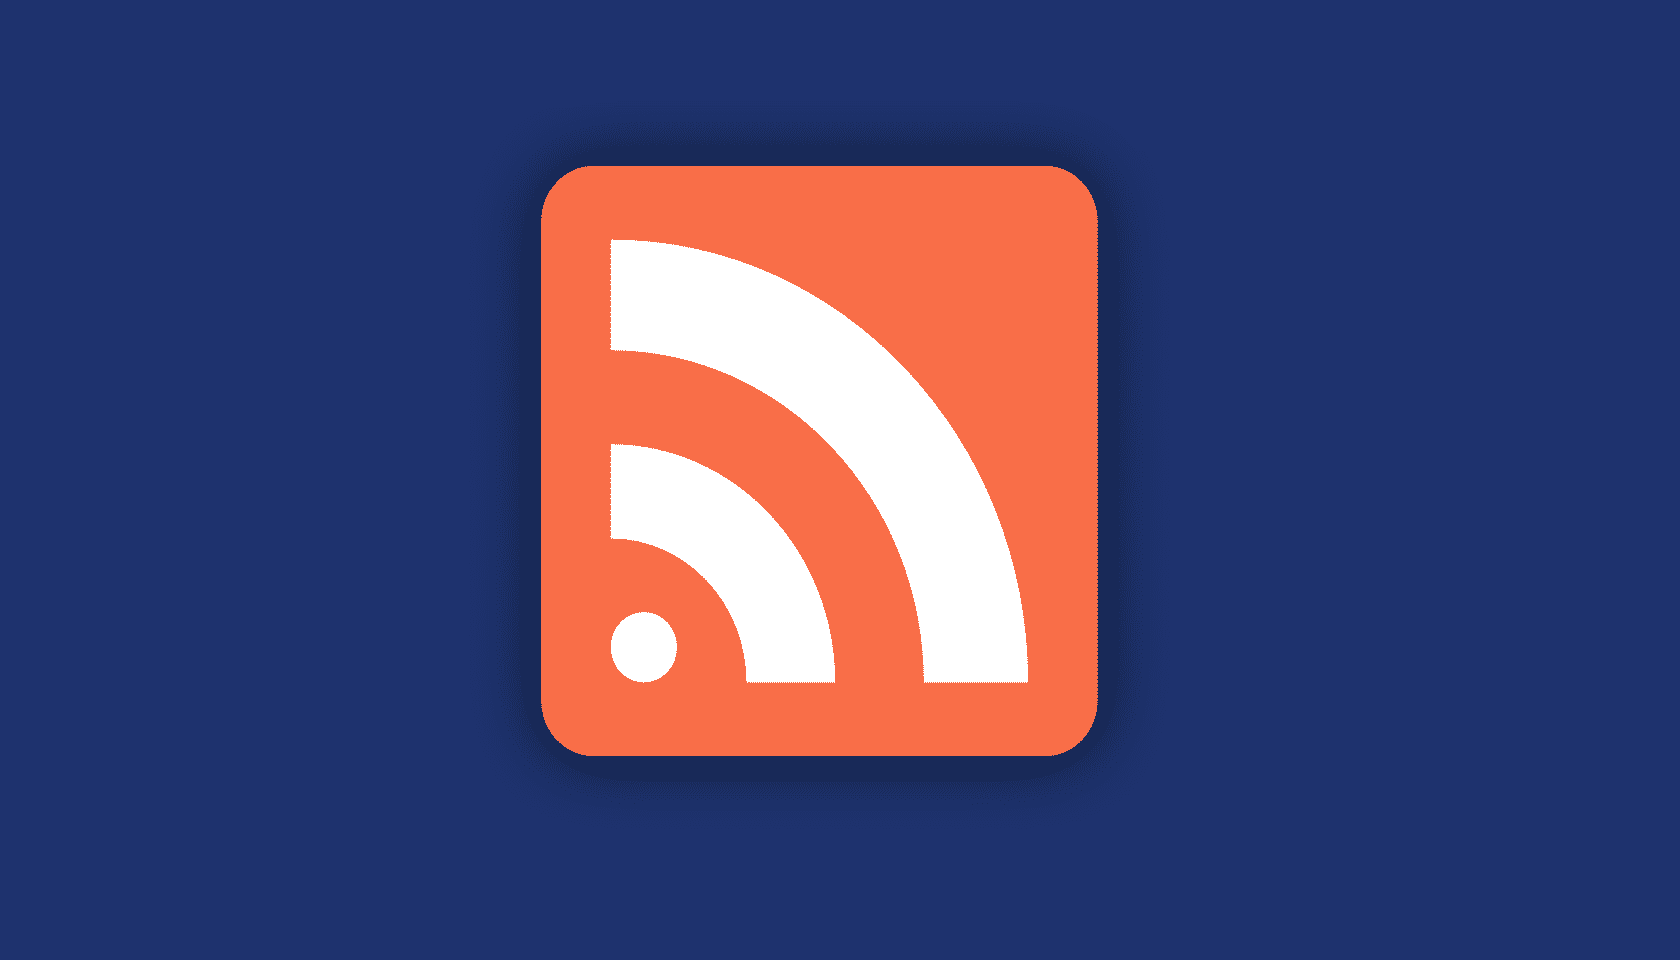 WordPress RSS Feed: How, When and Why Should You Use It